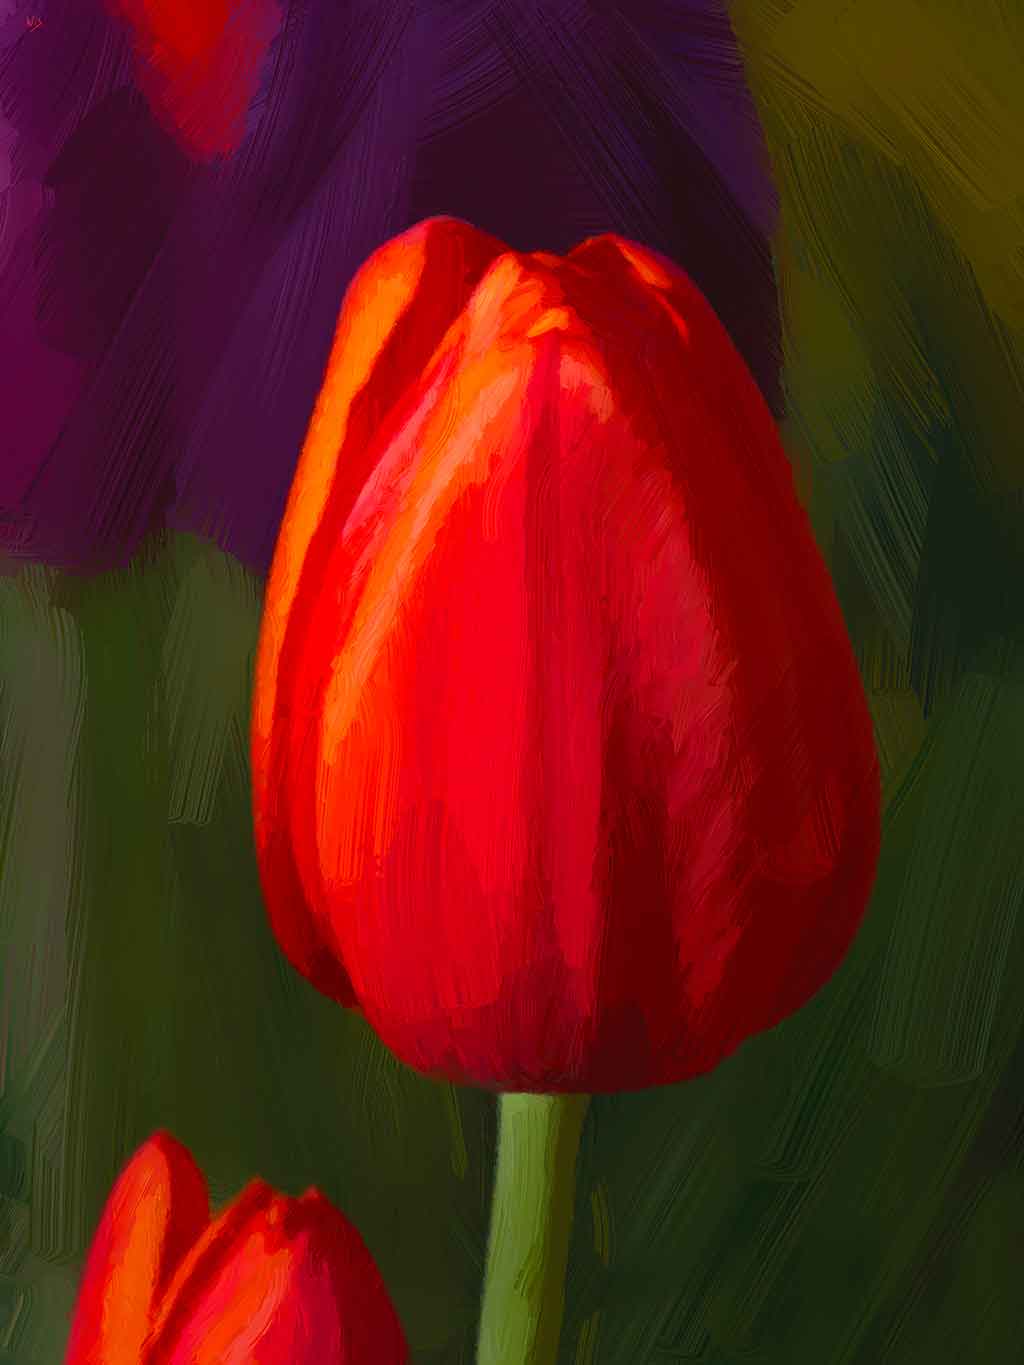 A single bud of a red Tulip opens into space of dark solitary green and deep feeling purple.